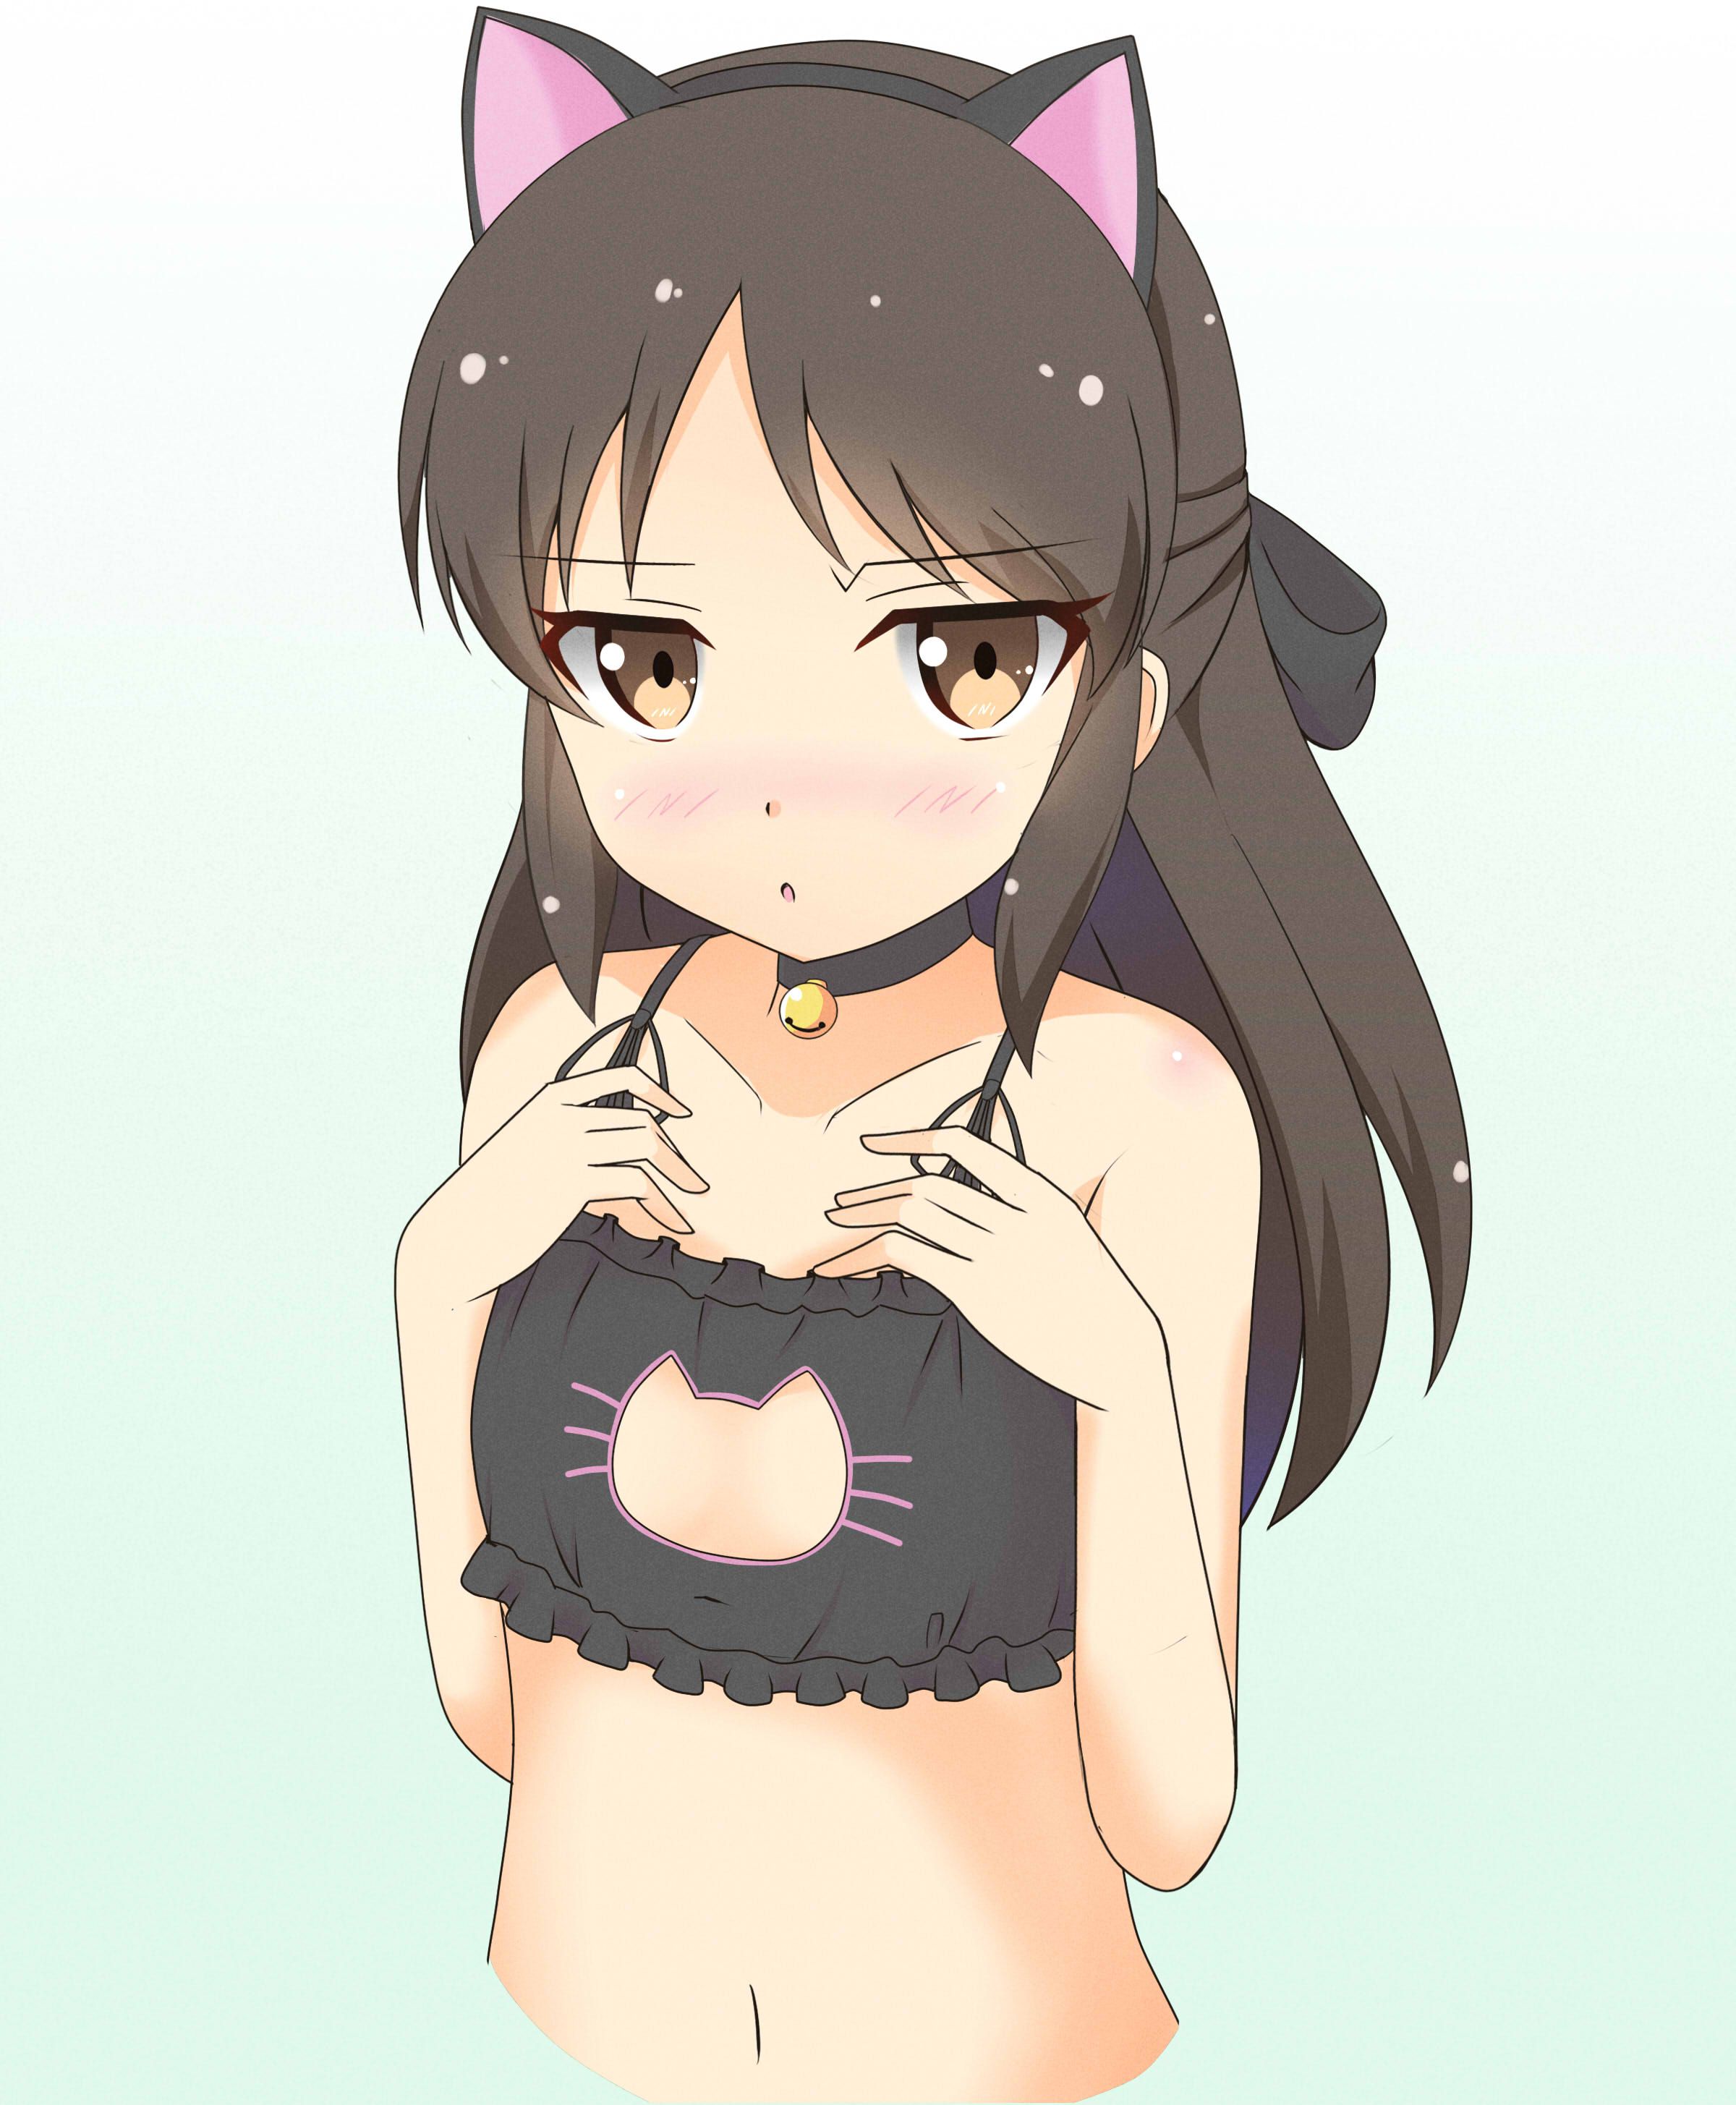 [39 pieces] I take an eroticism image having a cute the youth shorts & youth bra which is suitable for age of ガチ primary schoolchild Lolly Arisu Tachibana of デレマス! 32